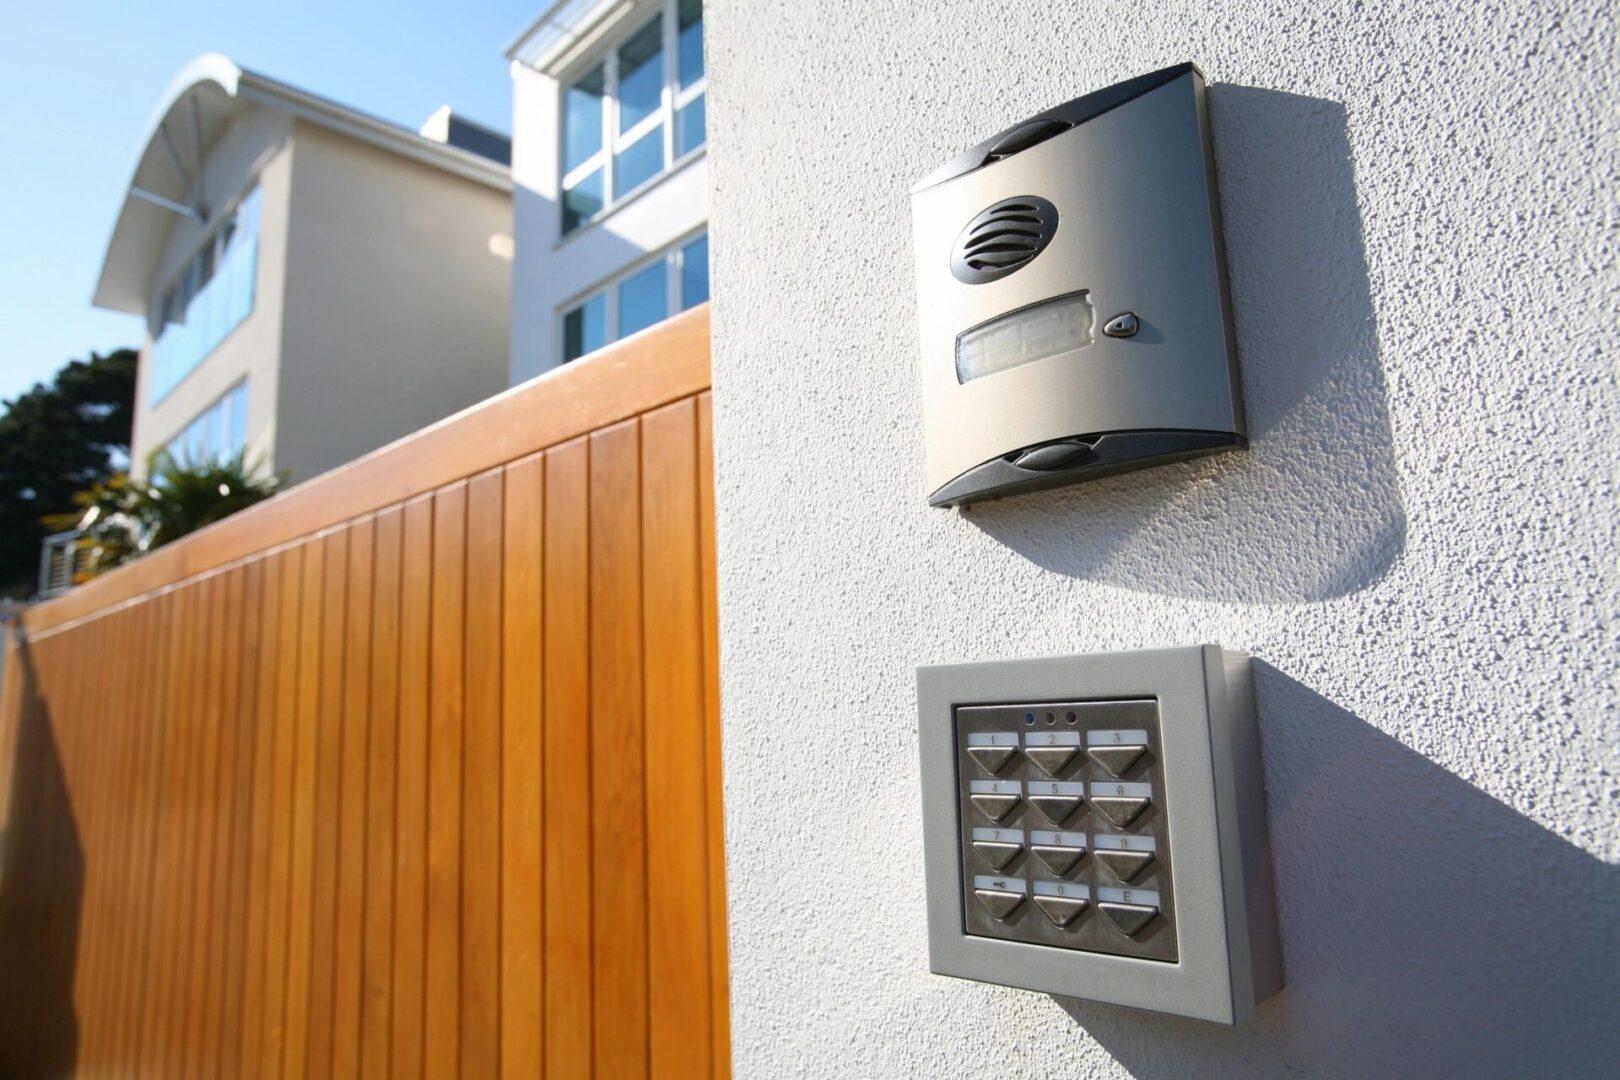 A close up of a door bell and a keypad